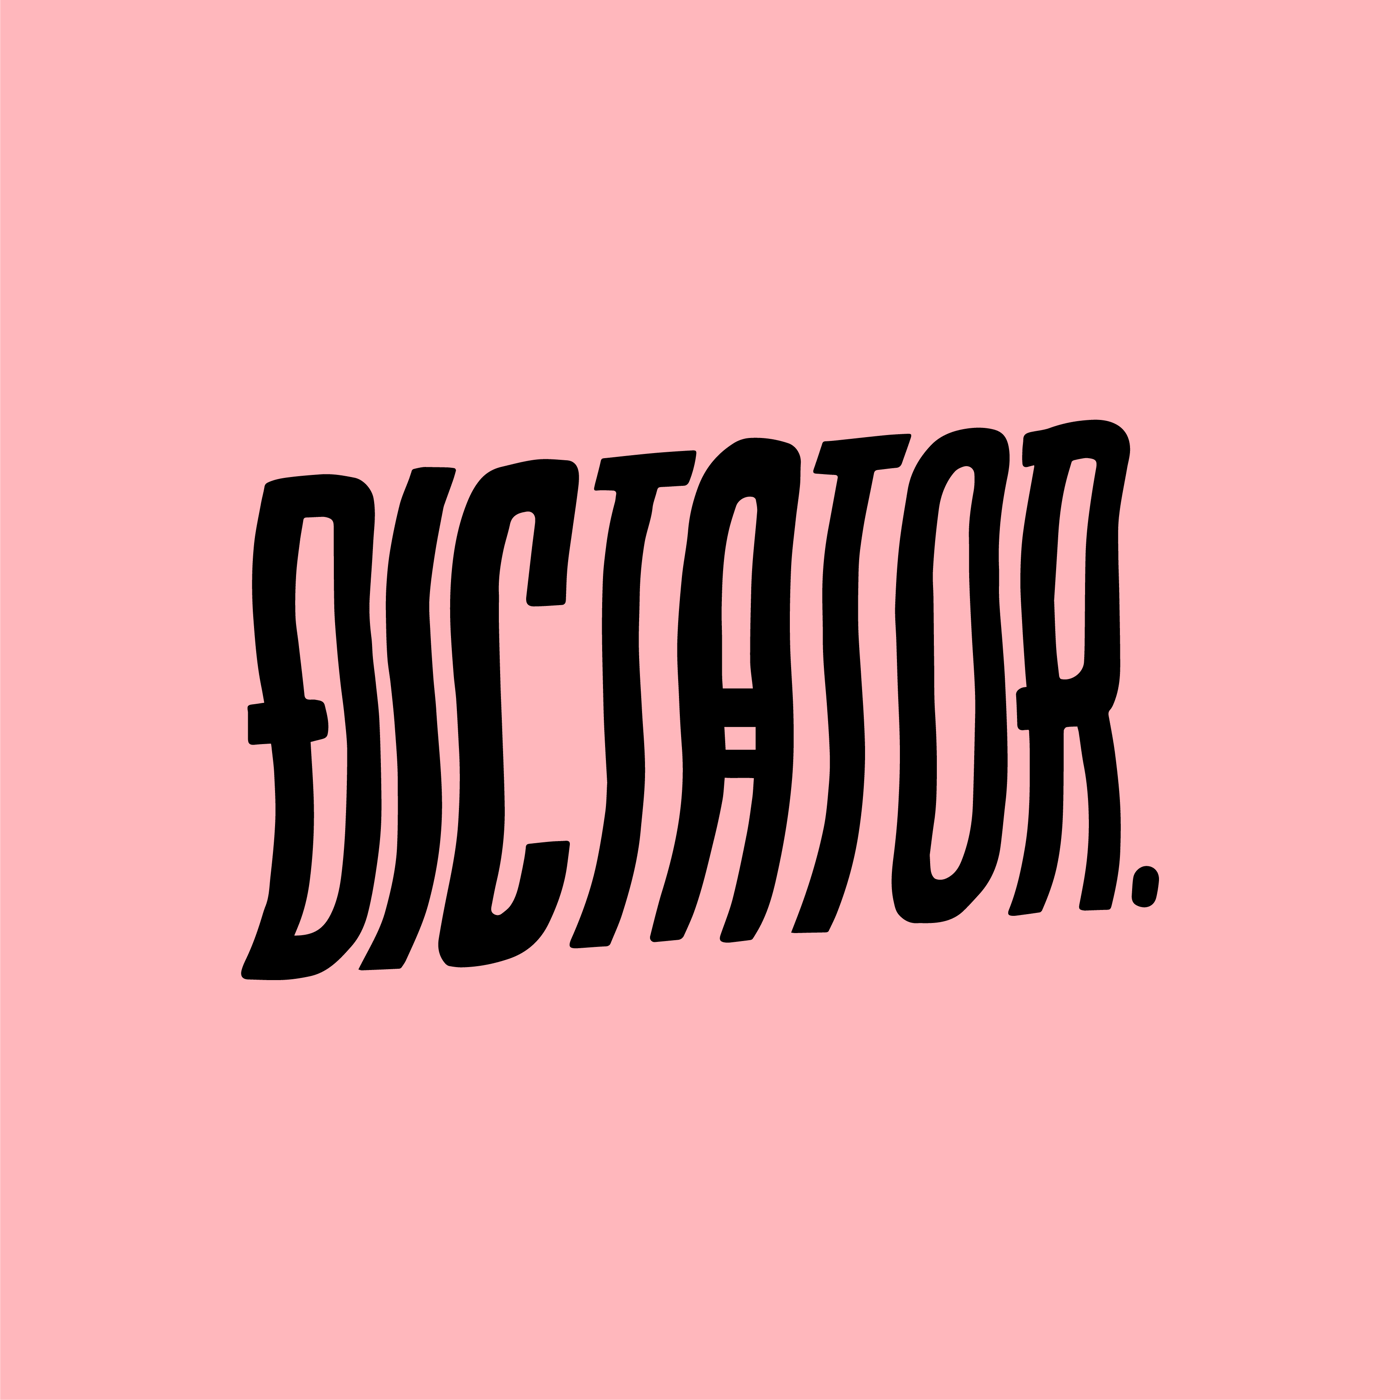 Welcome to Dictator